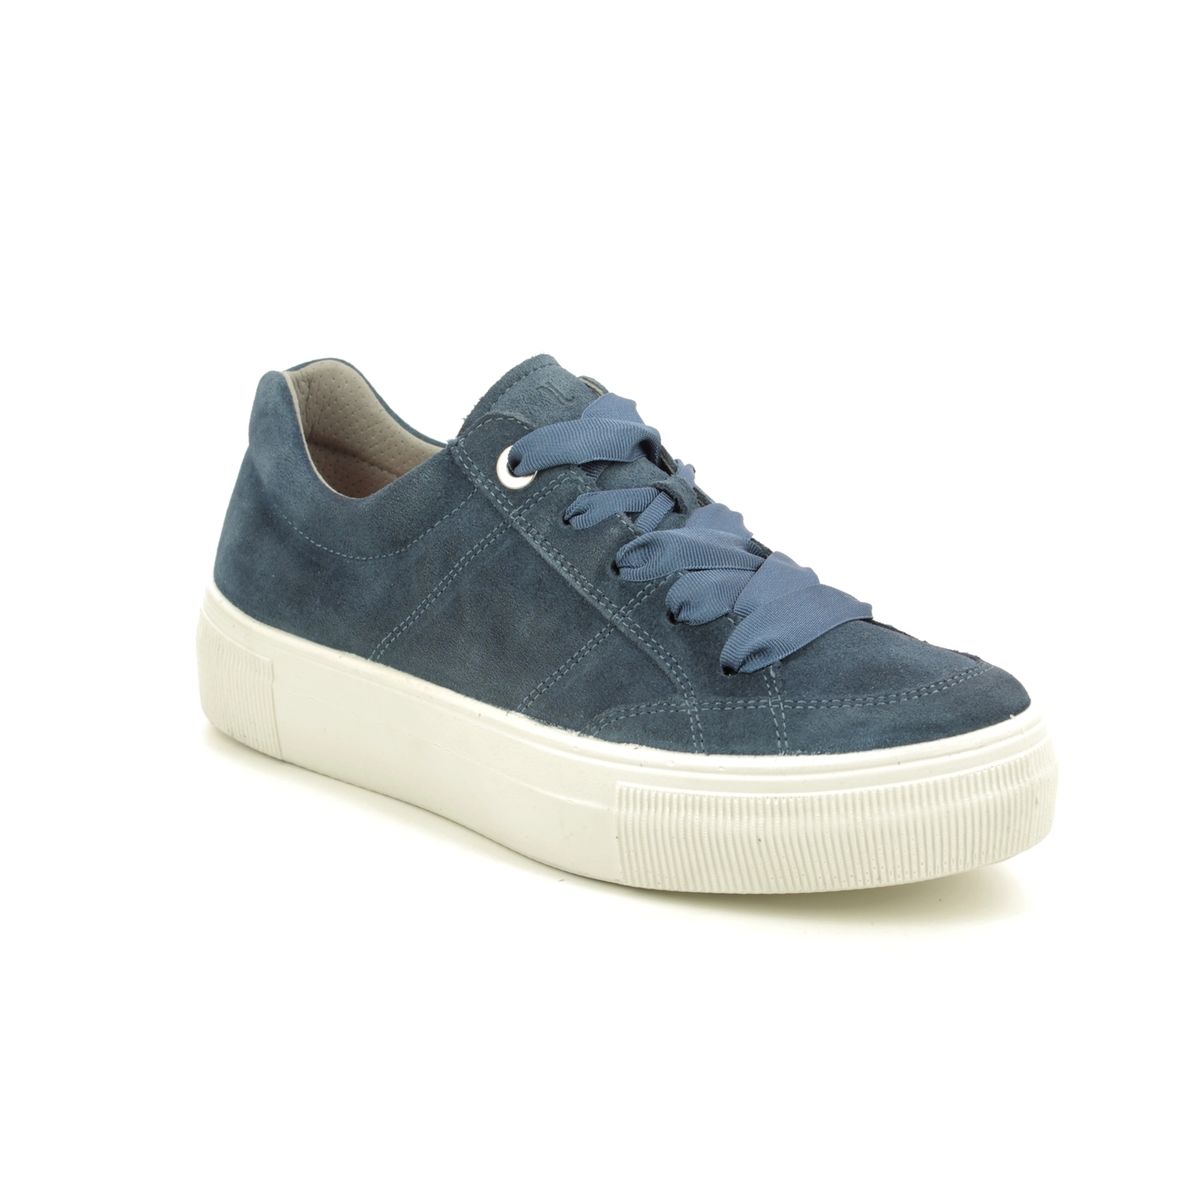 Legero Lima Stitch Blue Suede Womens Trainers 00910-86 In Size 37 In Plain Blue Suede